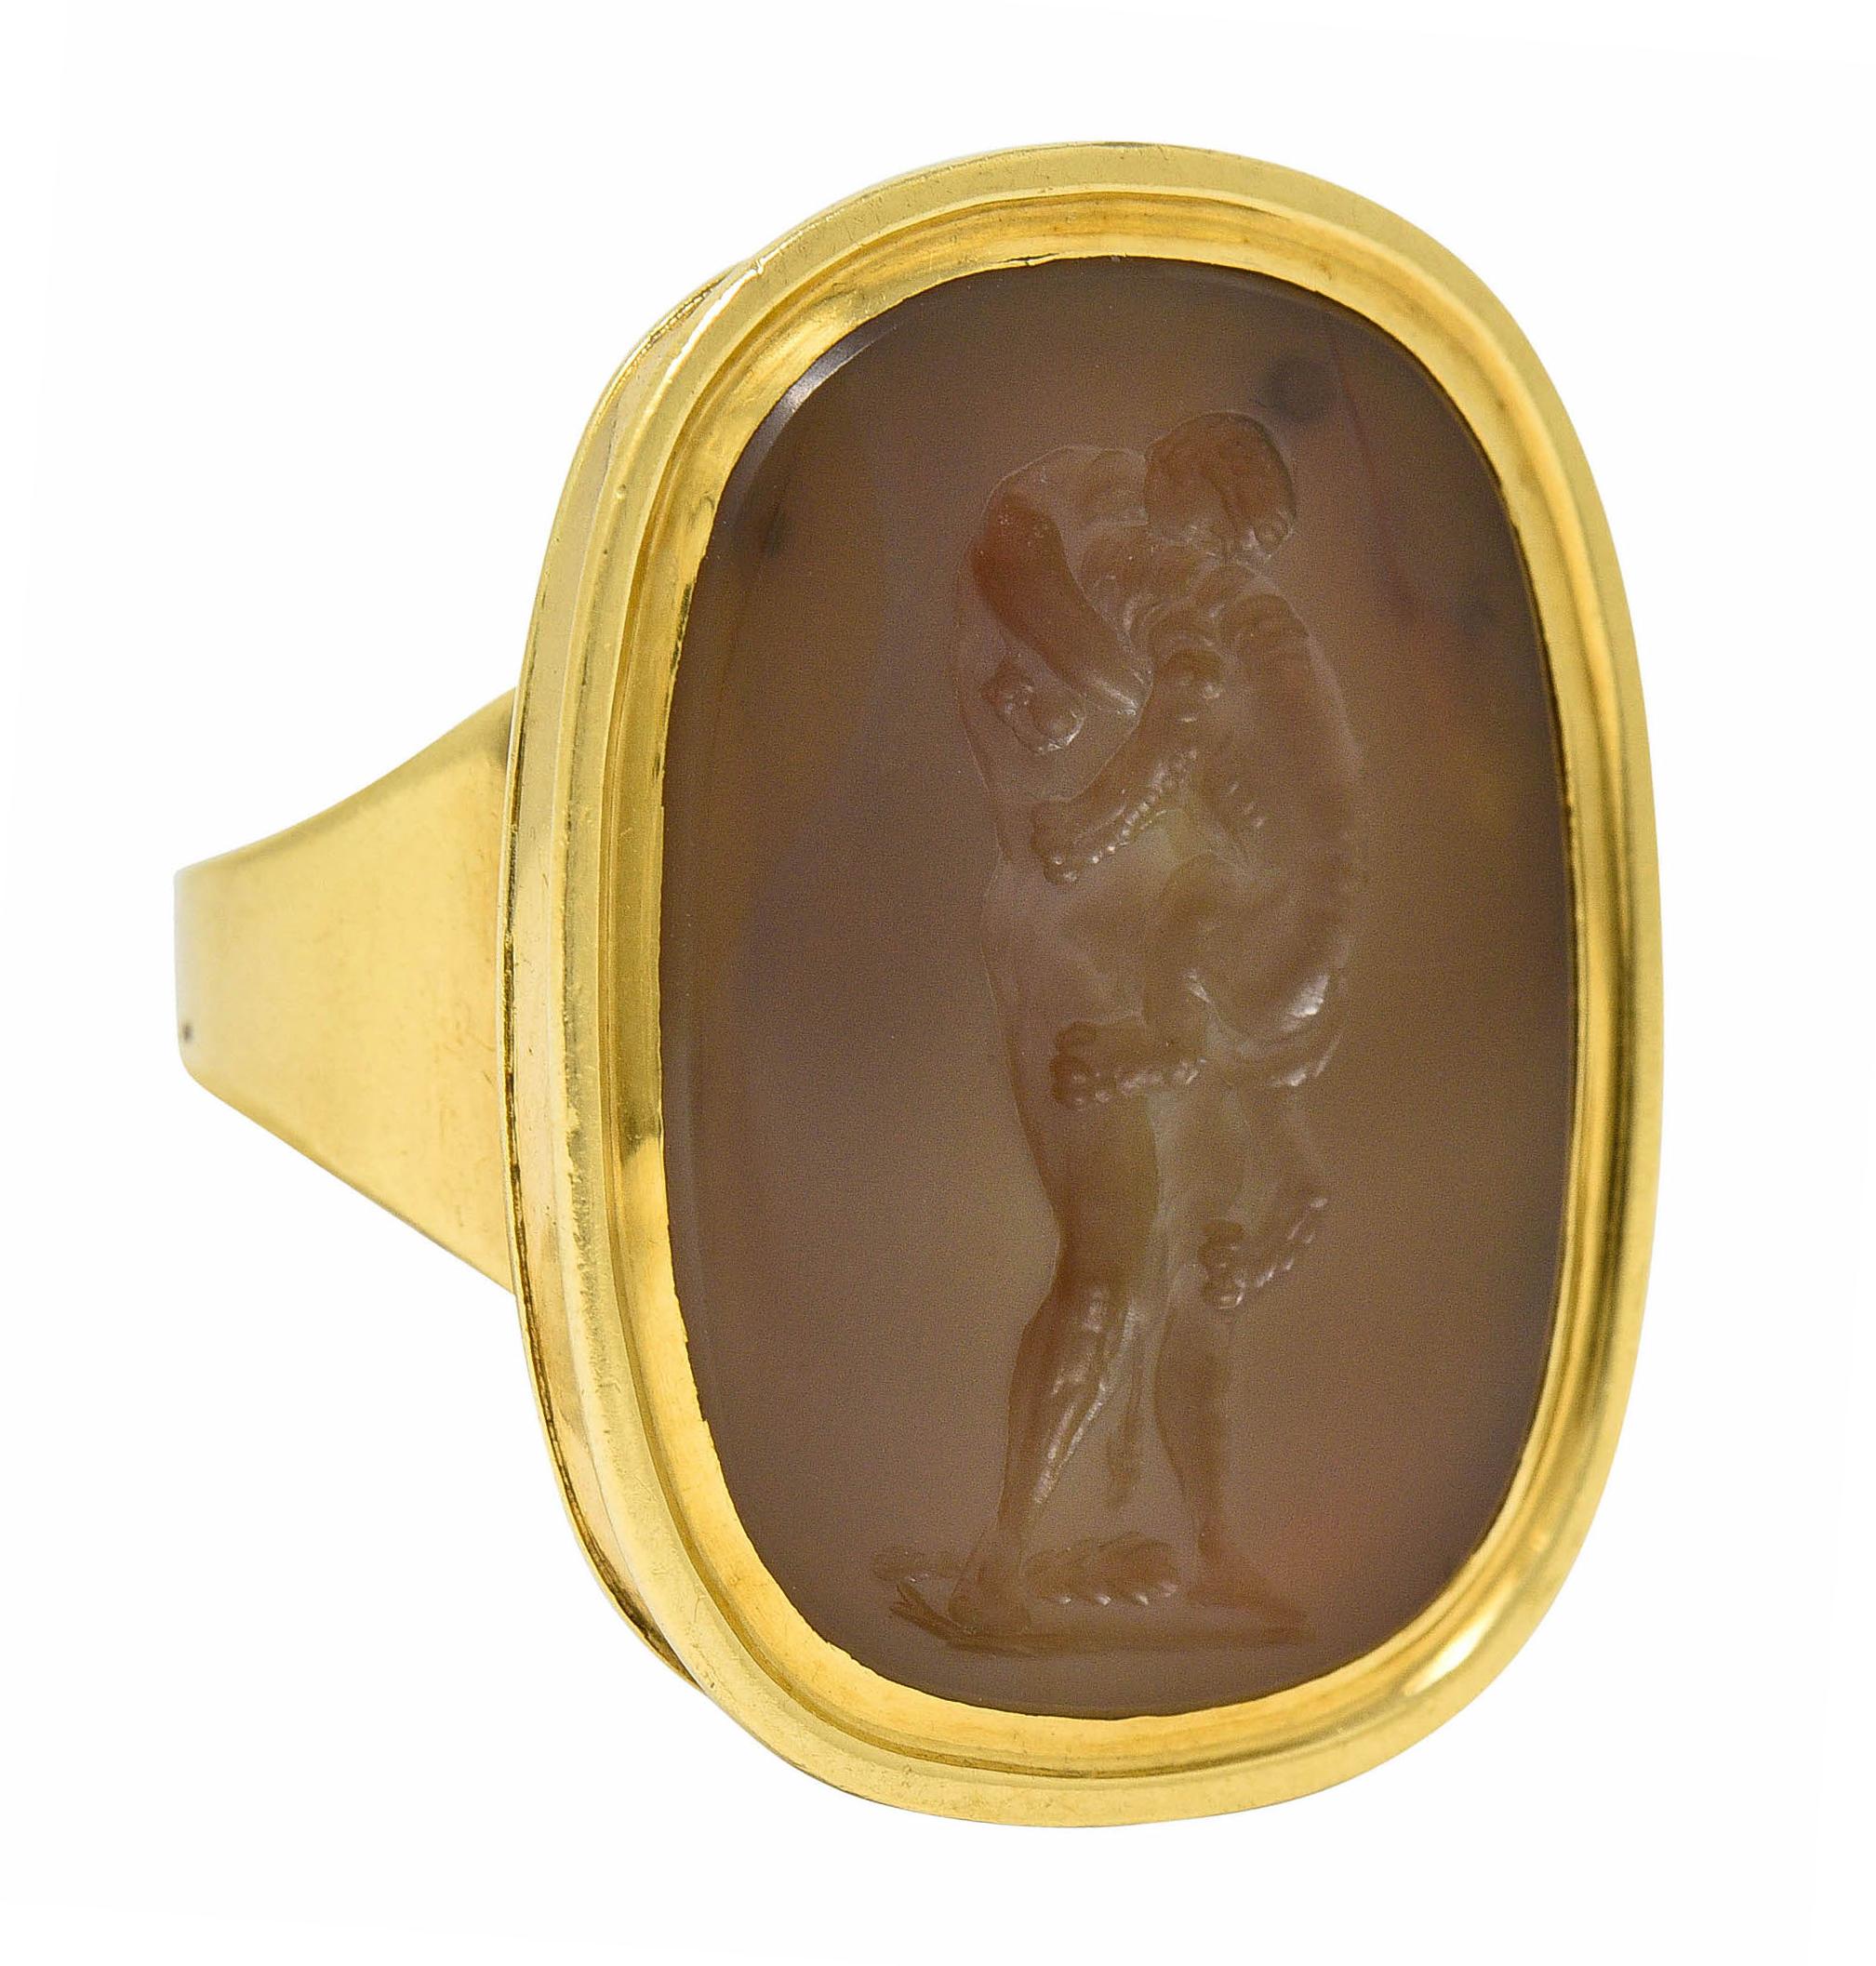 Centering an elongated cushion tablet of agate that measures 25.0 x 19.0 mm

Translucent taupe in color with very subtle mottling

Deeply engraved to depict Hercules grappling with the ferocious Nemean lion

Bezel set in a polished gold